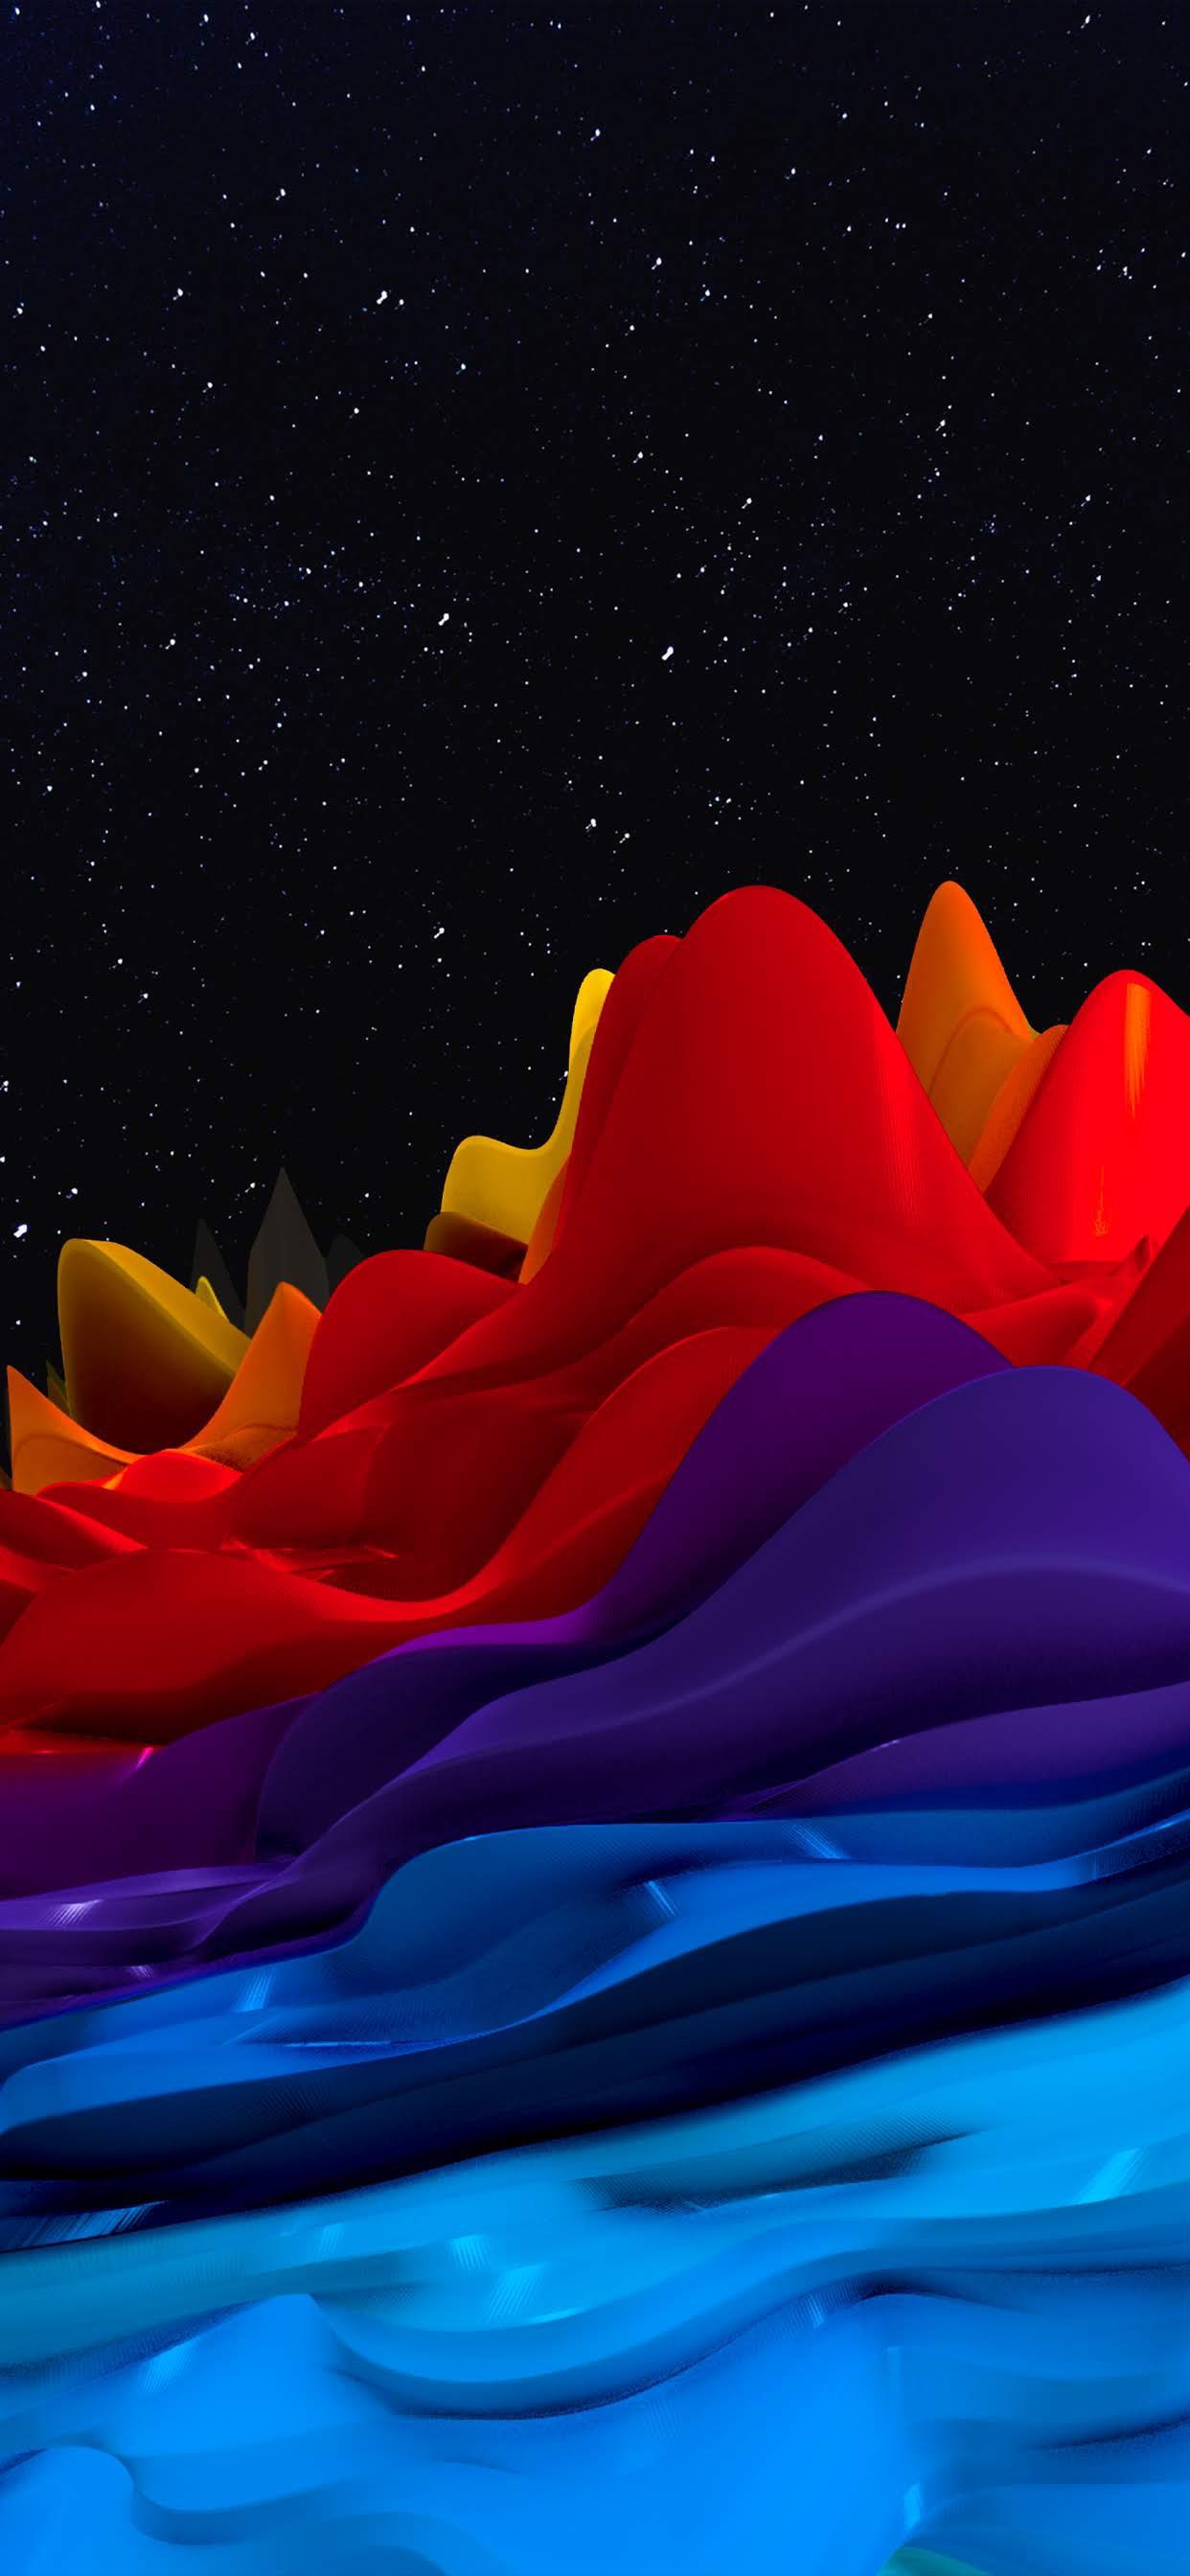 Colorful Waves Space wallpaper for Apple iPhone, Mac, iPad and more